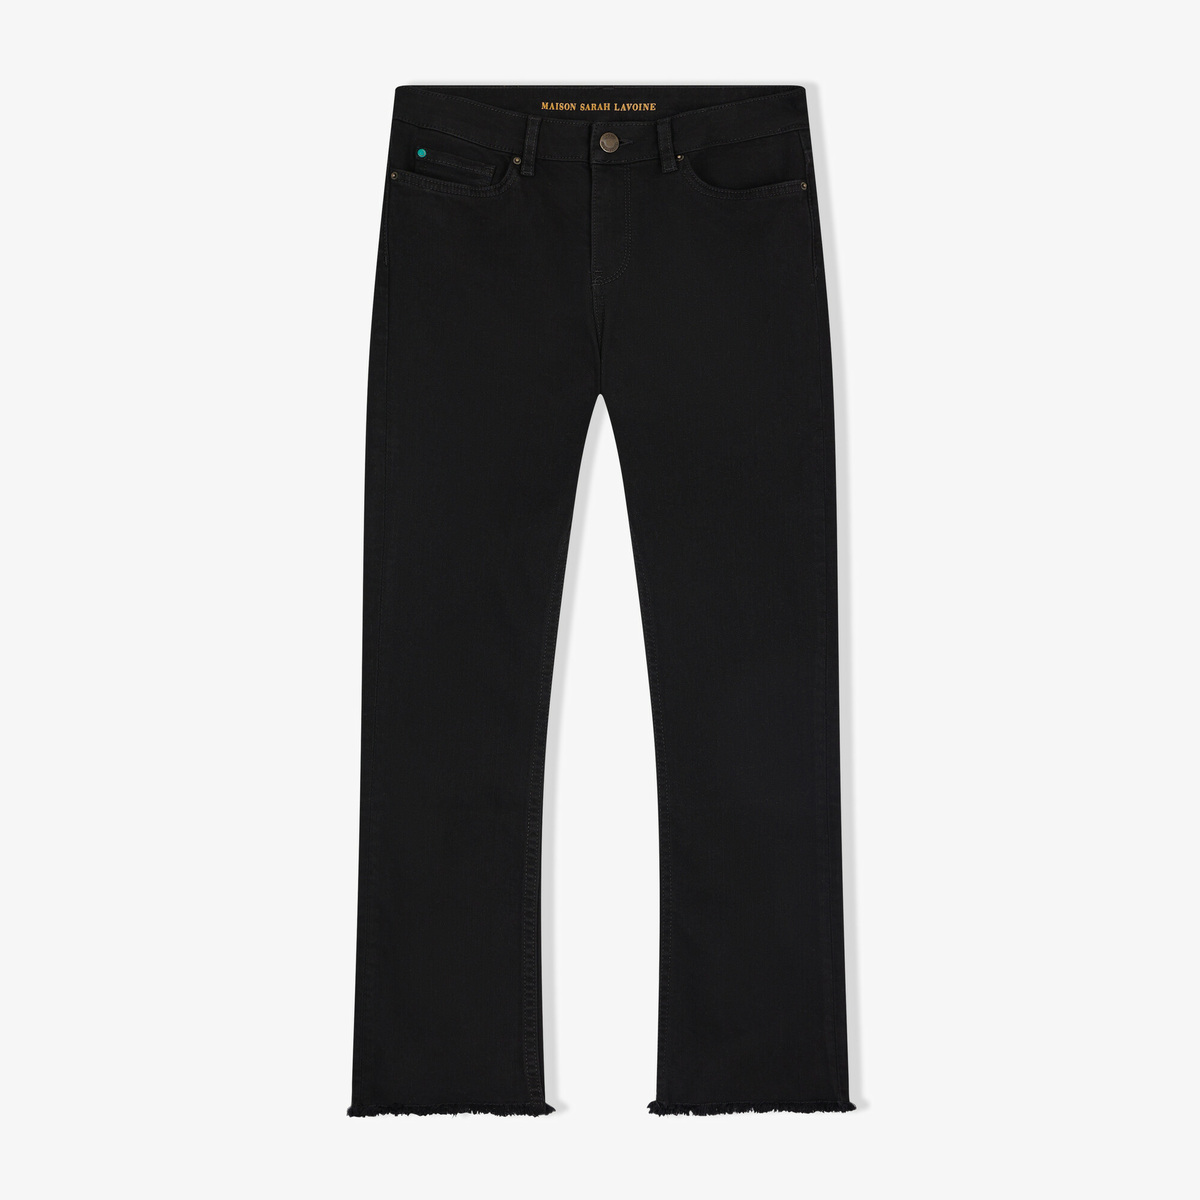 Cropped Jean Sol, Black - Cropped flared jean - Cotton - image 1